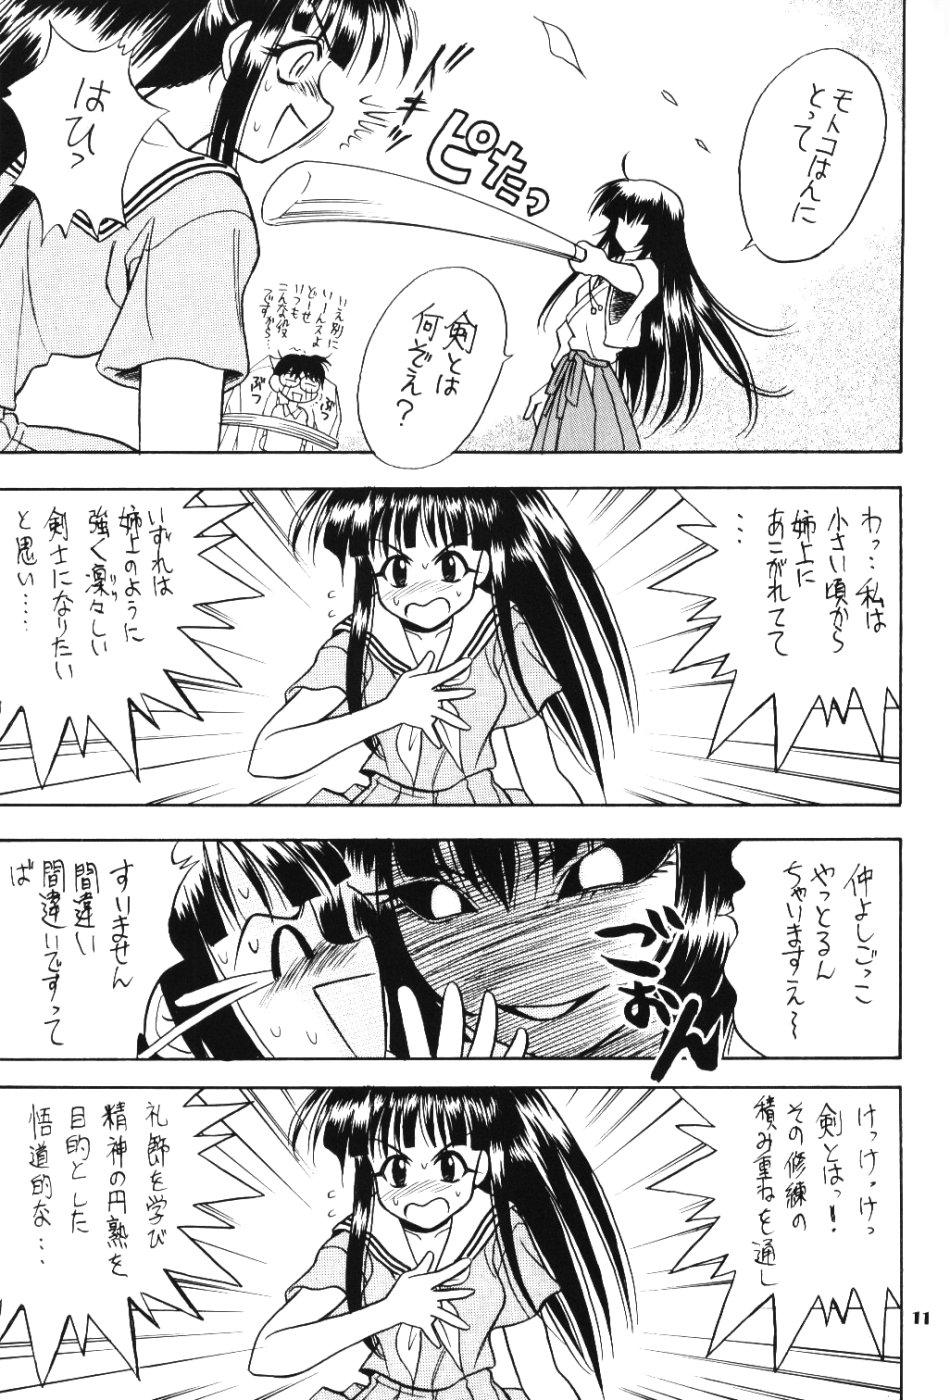 Vaginal Lovely 3 - Love hina Facebook - Page 10